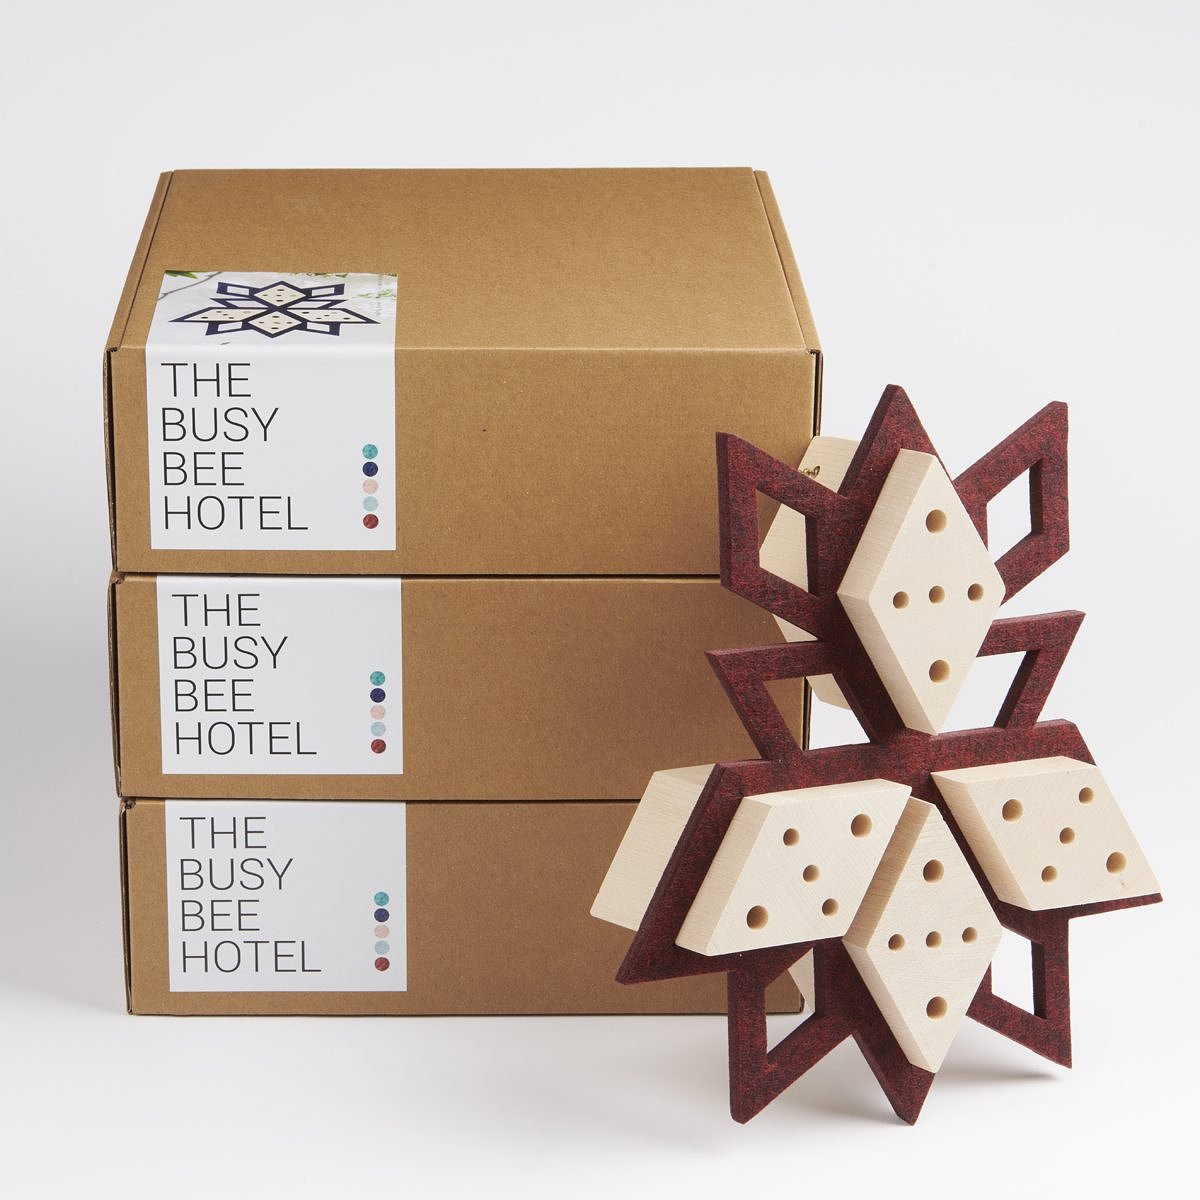 The busy bee hotel - Warm Red